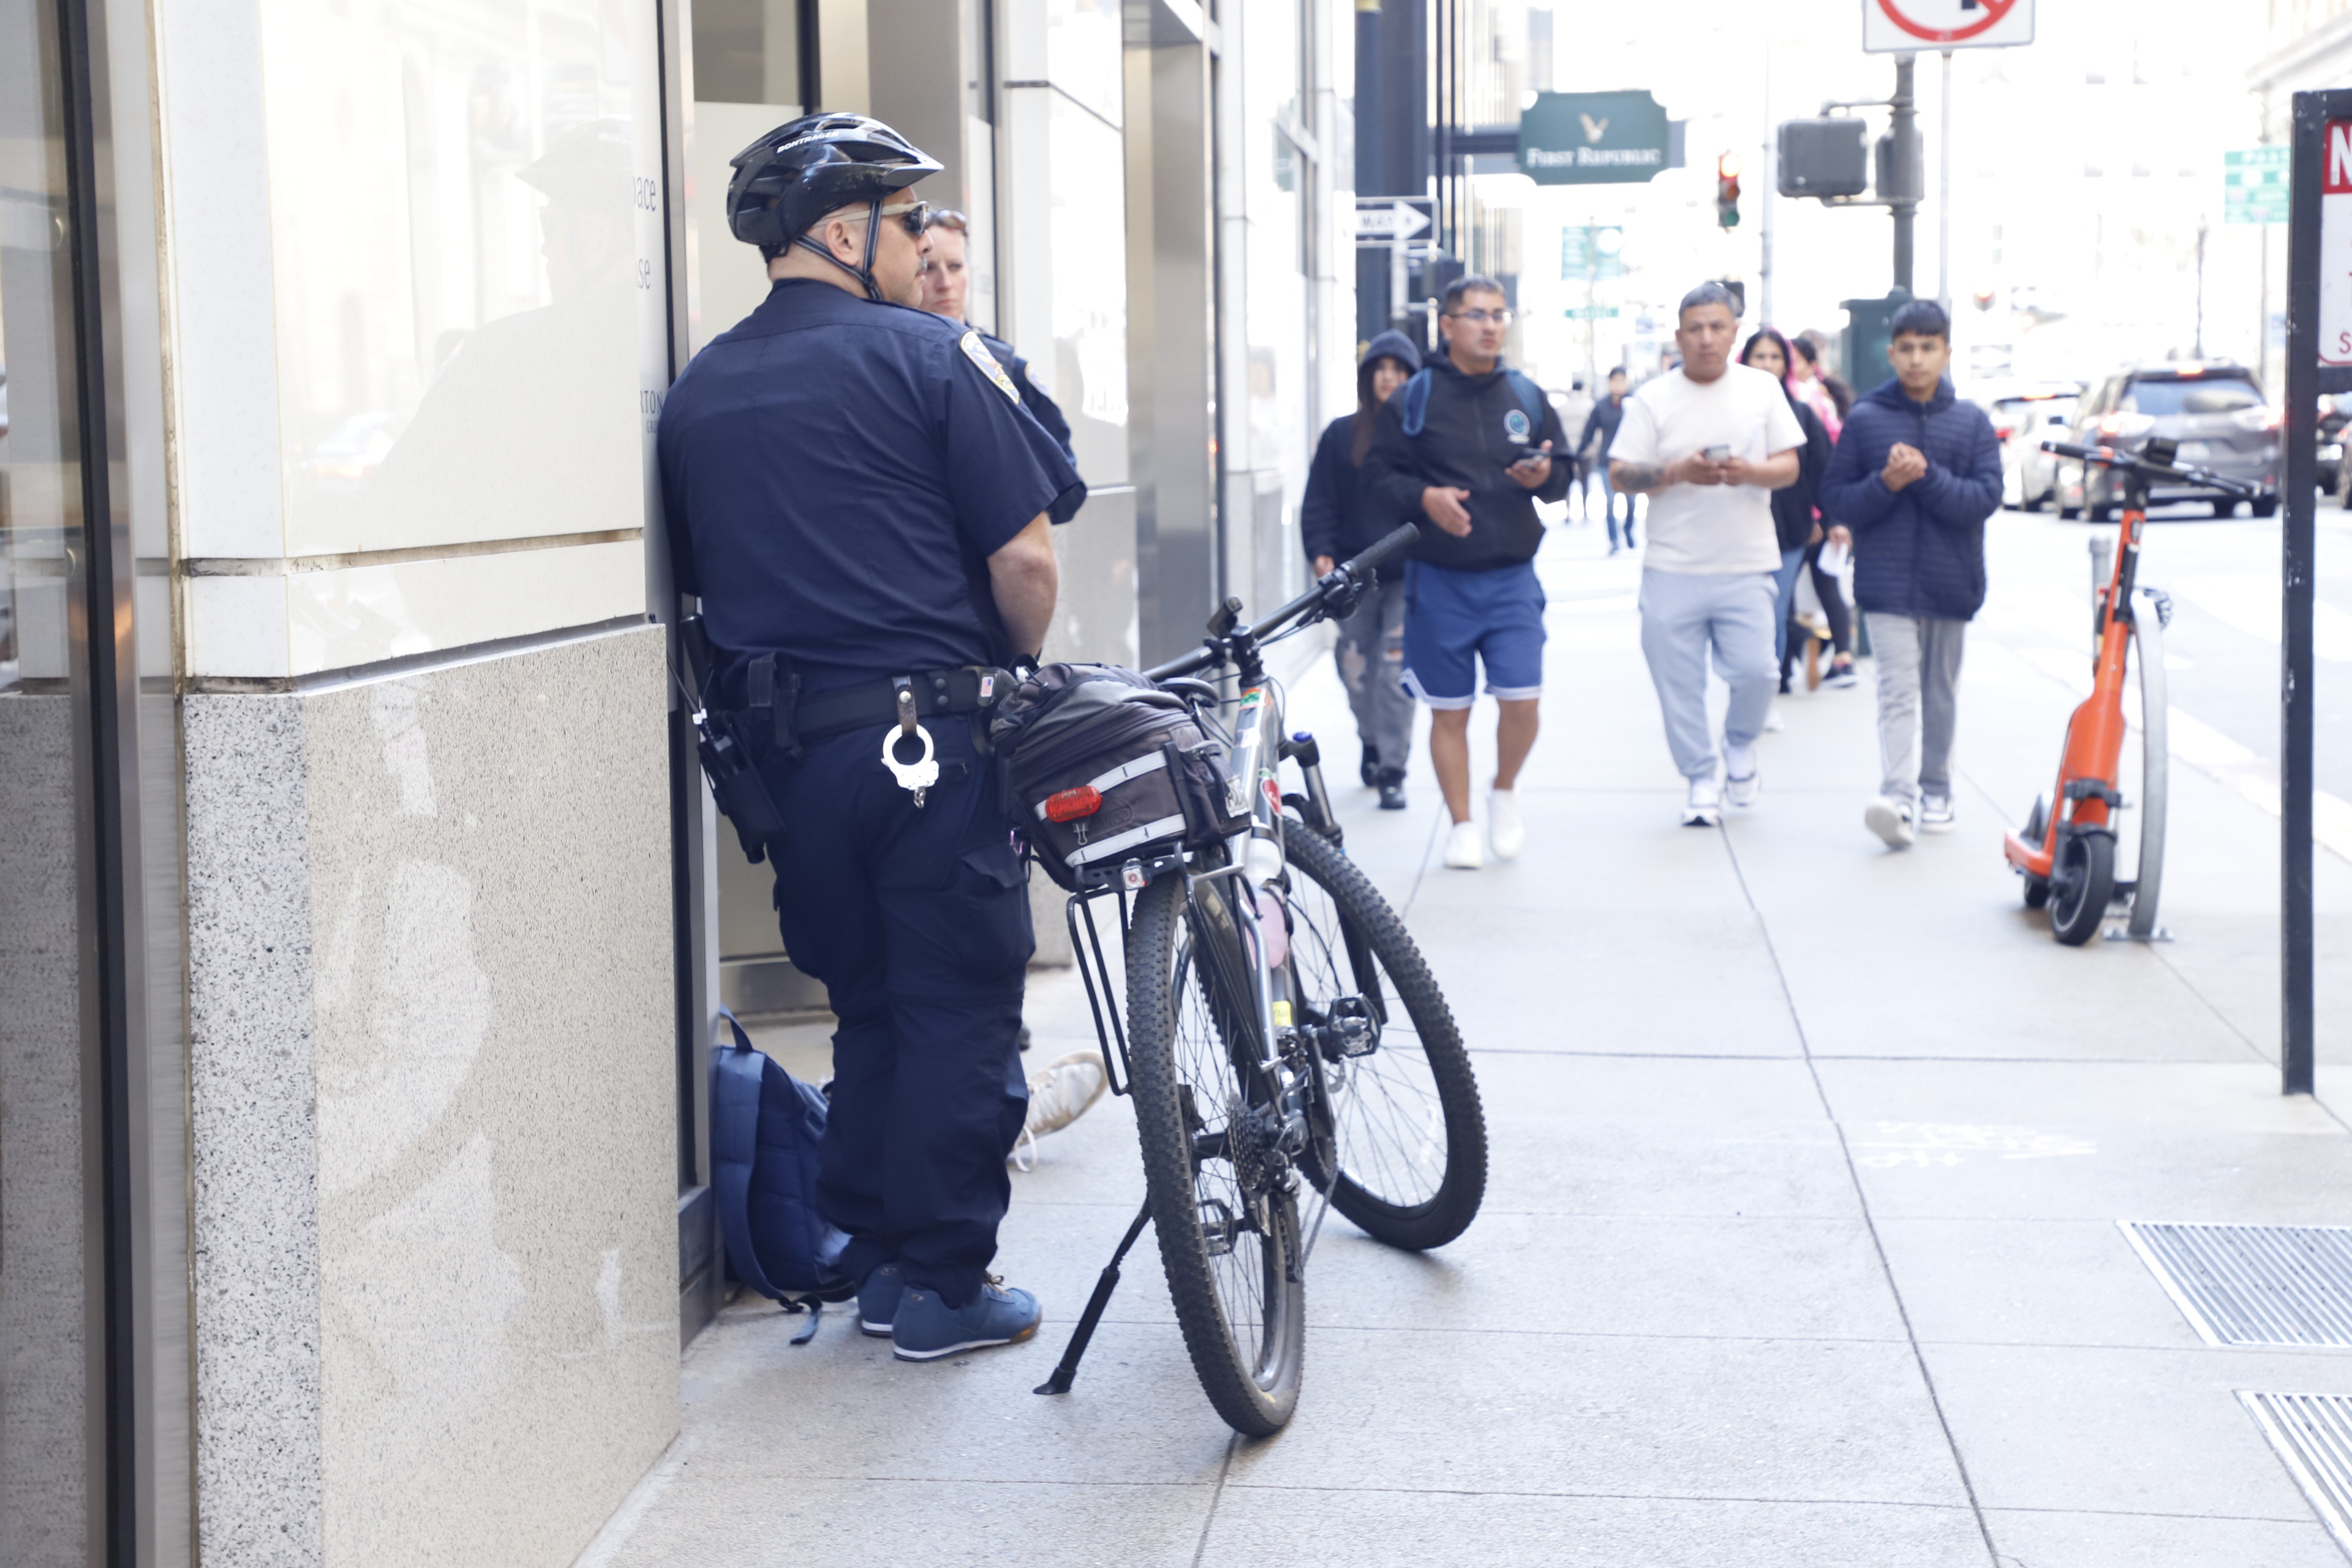 Two police officers are standing by a bike on a sunny city sidewalk as people walk by.